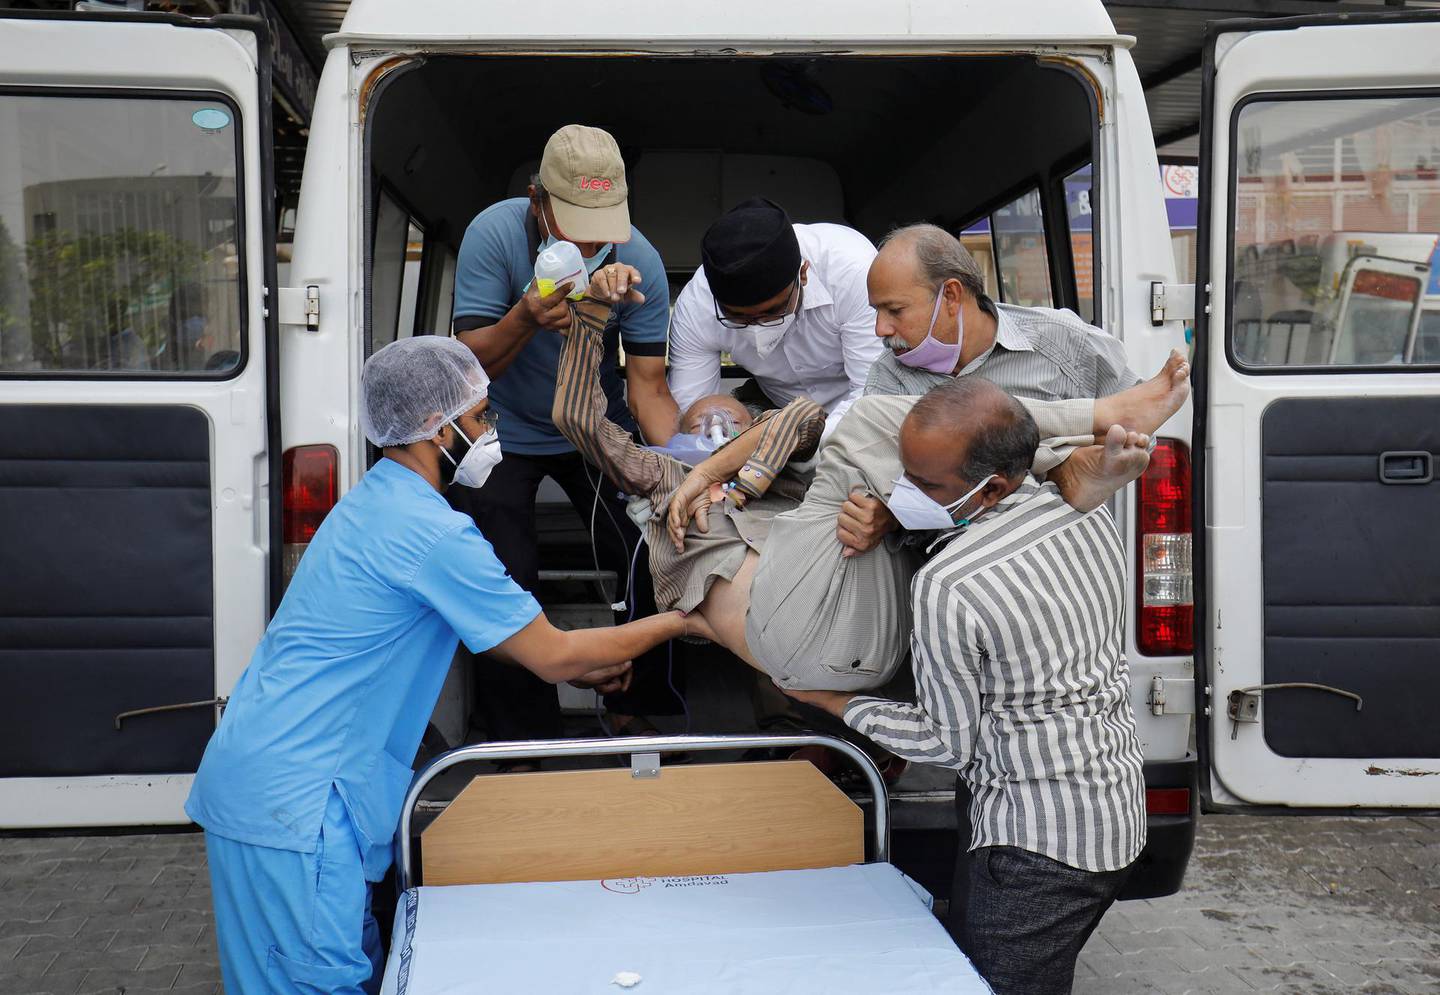 Healthcare workers and relatives carry Shashikantbhai Parekh, a patient with breathing problem, out from an ambulance for treatment at a COVID-19 hospital, amidst the spread of the coronavirus disease (COVID-19) in Ahmedabad, India, April 28, 2021. REUTERS/Amit Dave